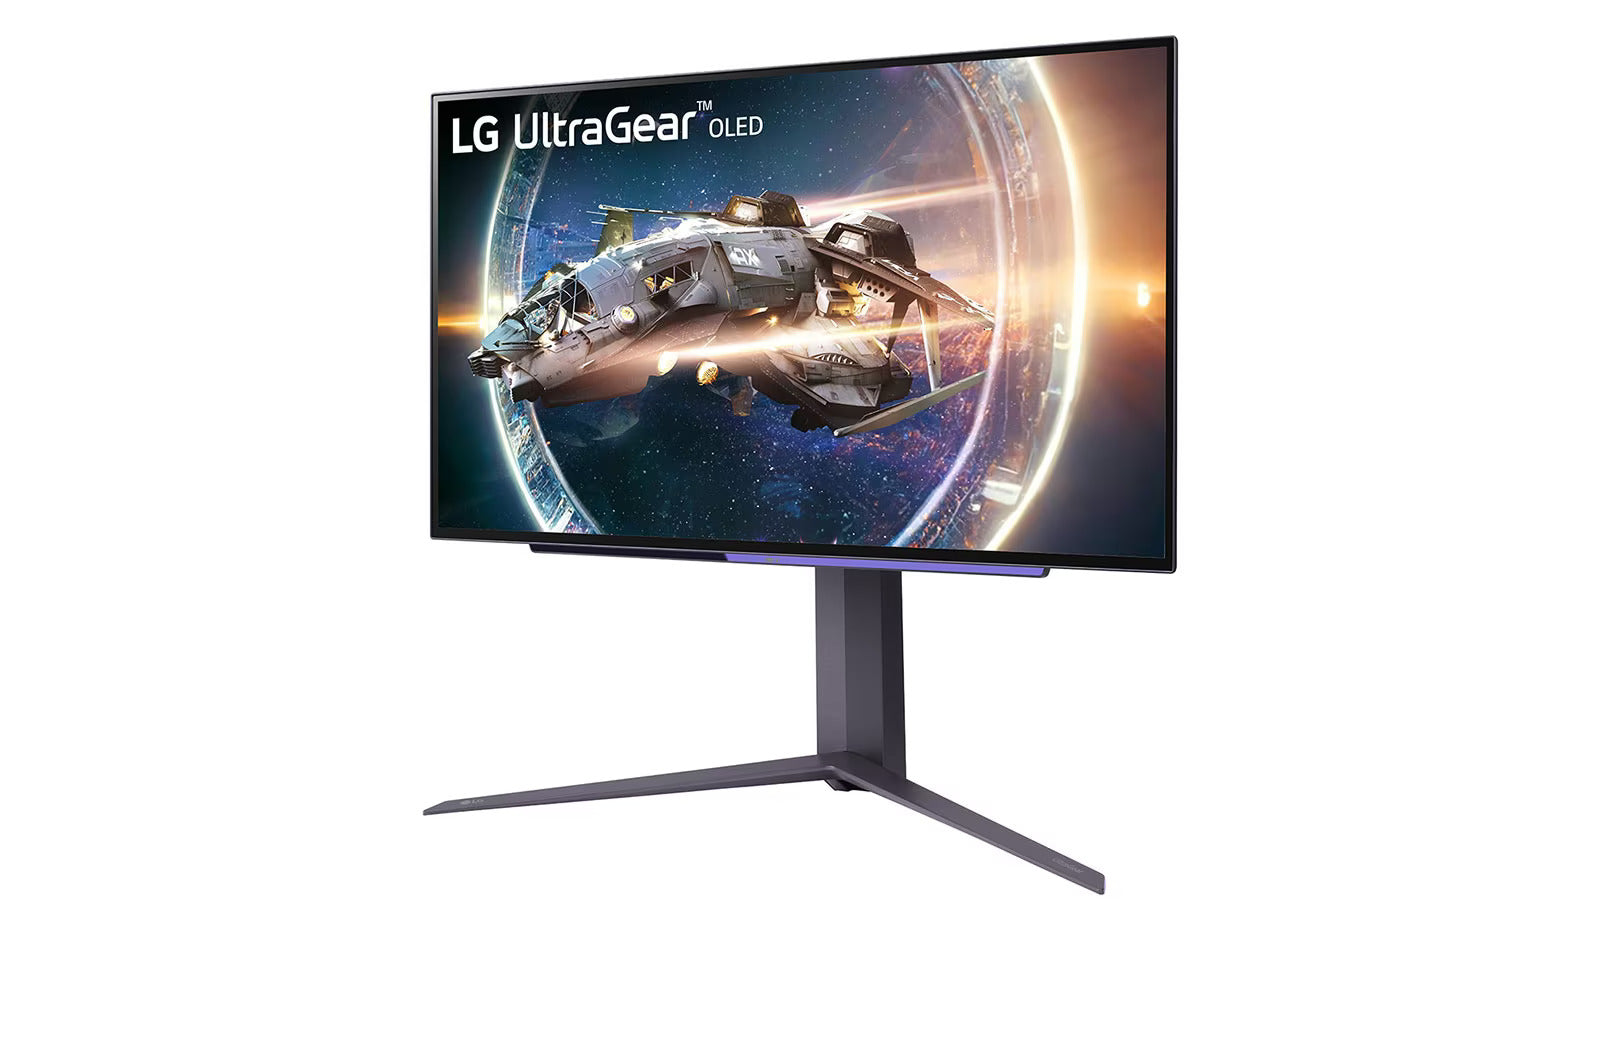 LG 27GR95QE-B 27'' UltraGear™ OLED Gaming Monitor QHD with 240Hz Refresh Rate 0.03ms (GtG) Response Time